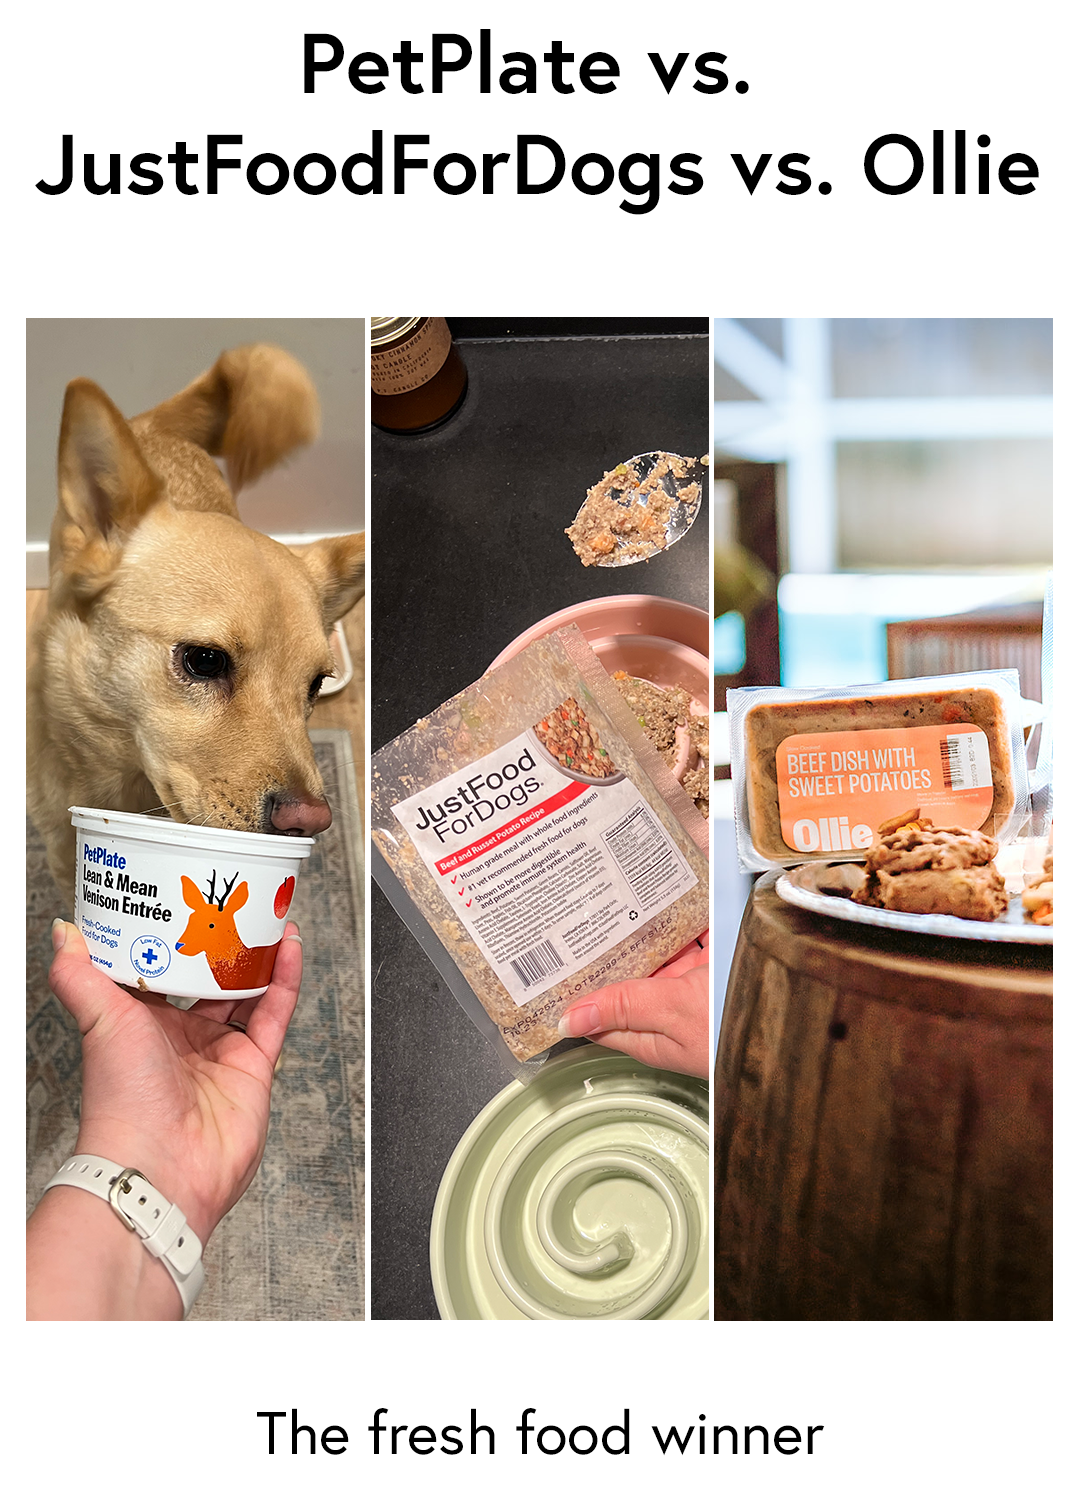 PetPlate vs. Ollie vs. JustFoodForDogs: Which Gets 4 Out Of 4 Paws?